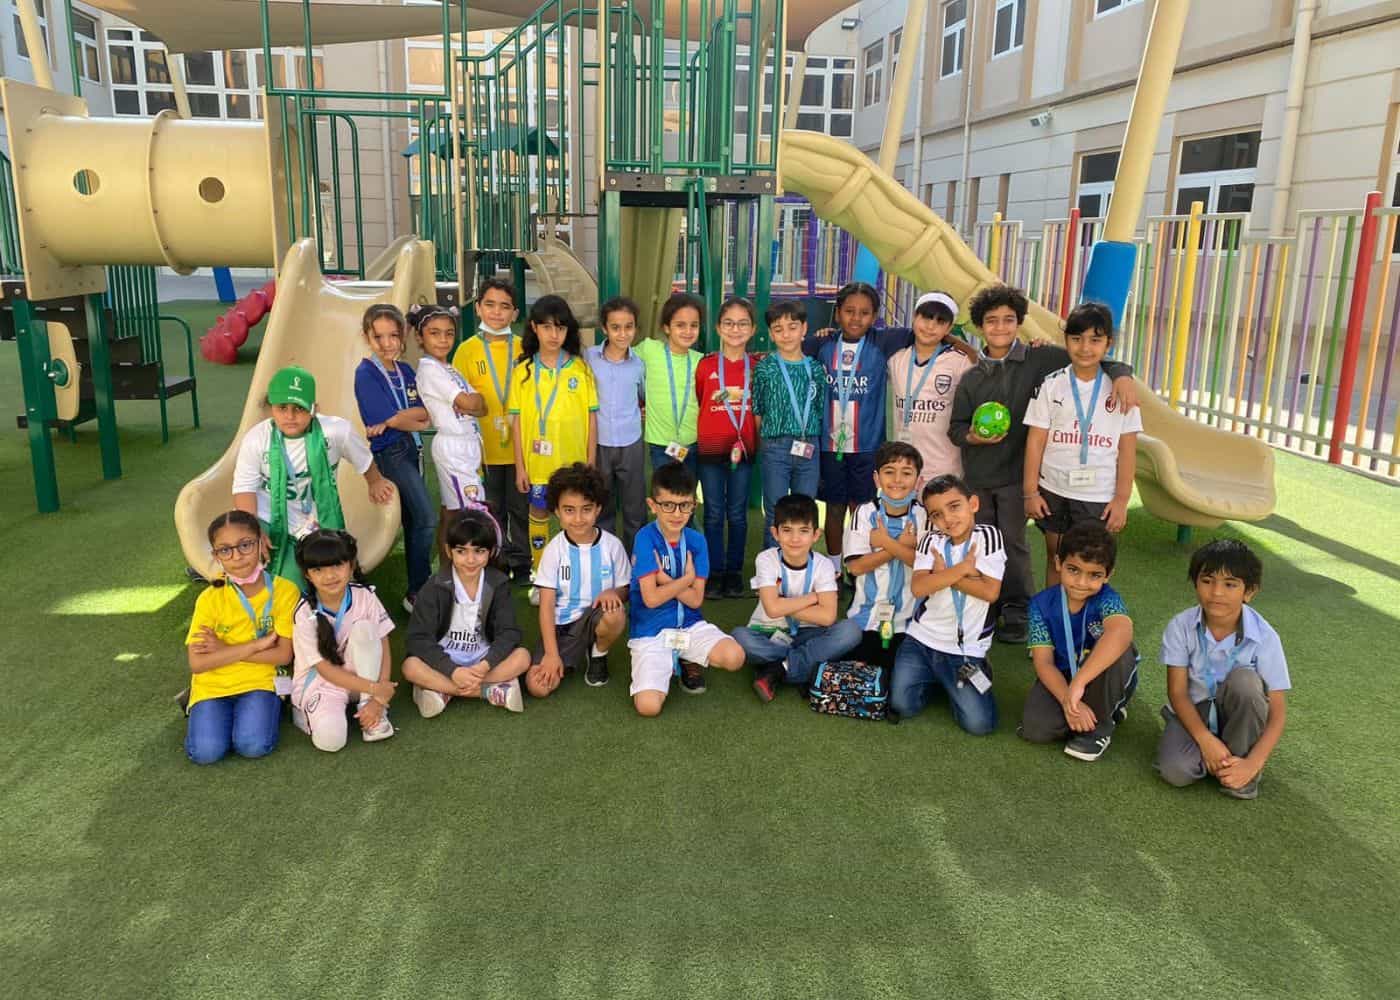 Students of Abu Dhabi International School at the Football event